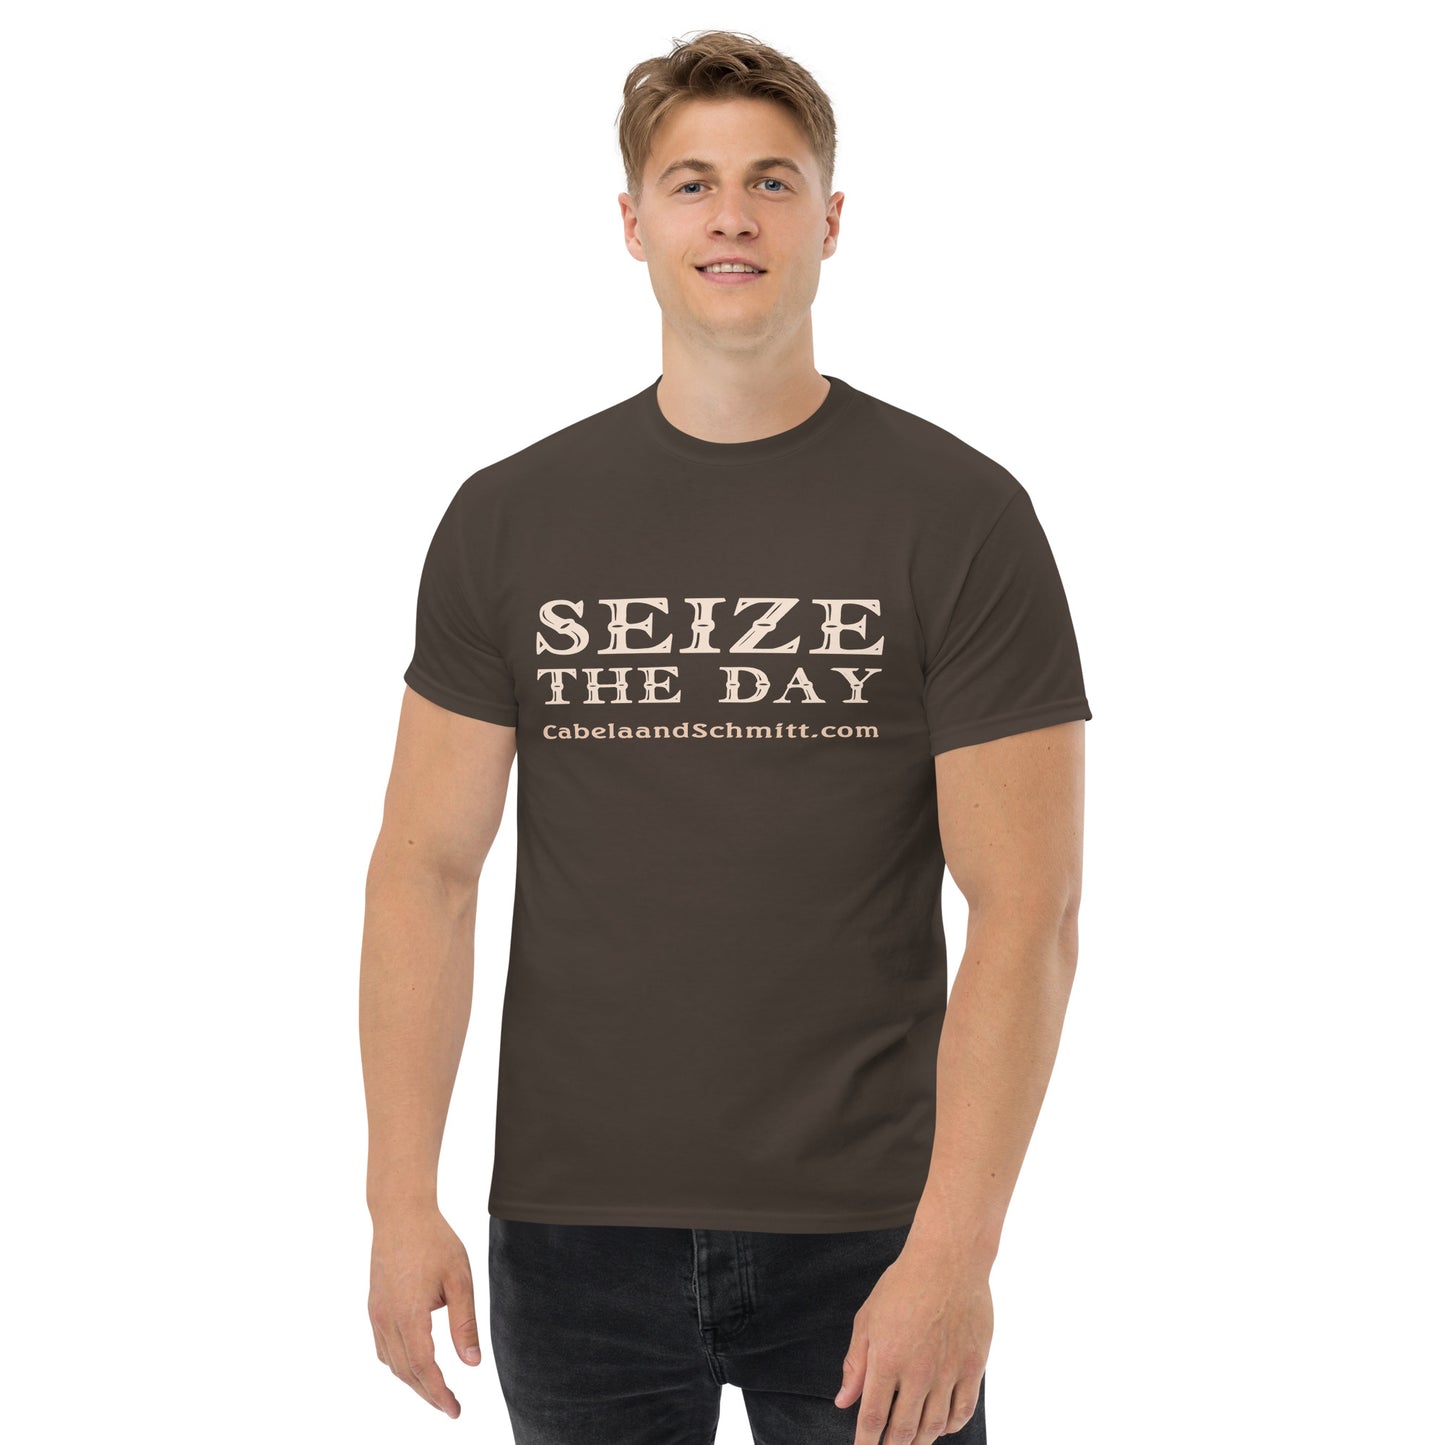 "Seize the Day" Men's classic tee